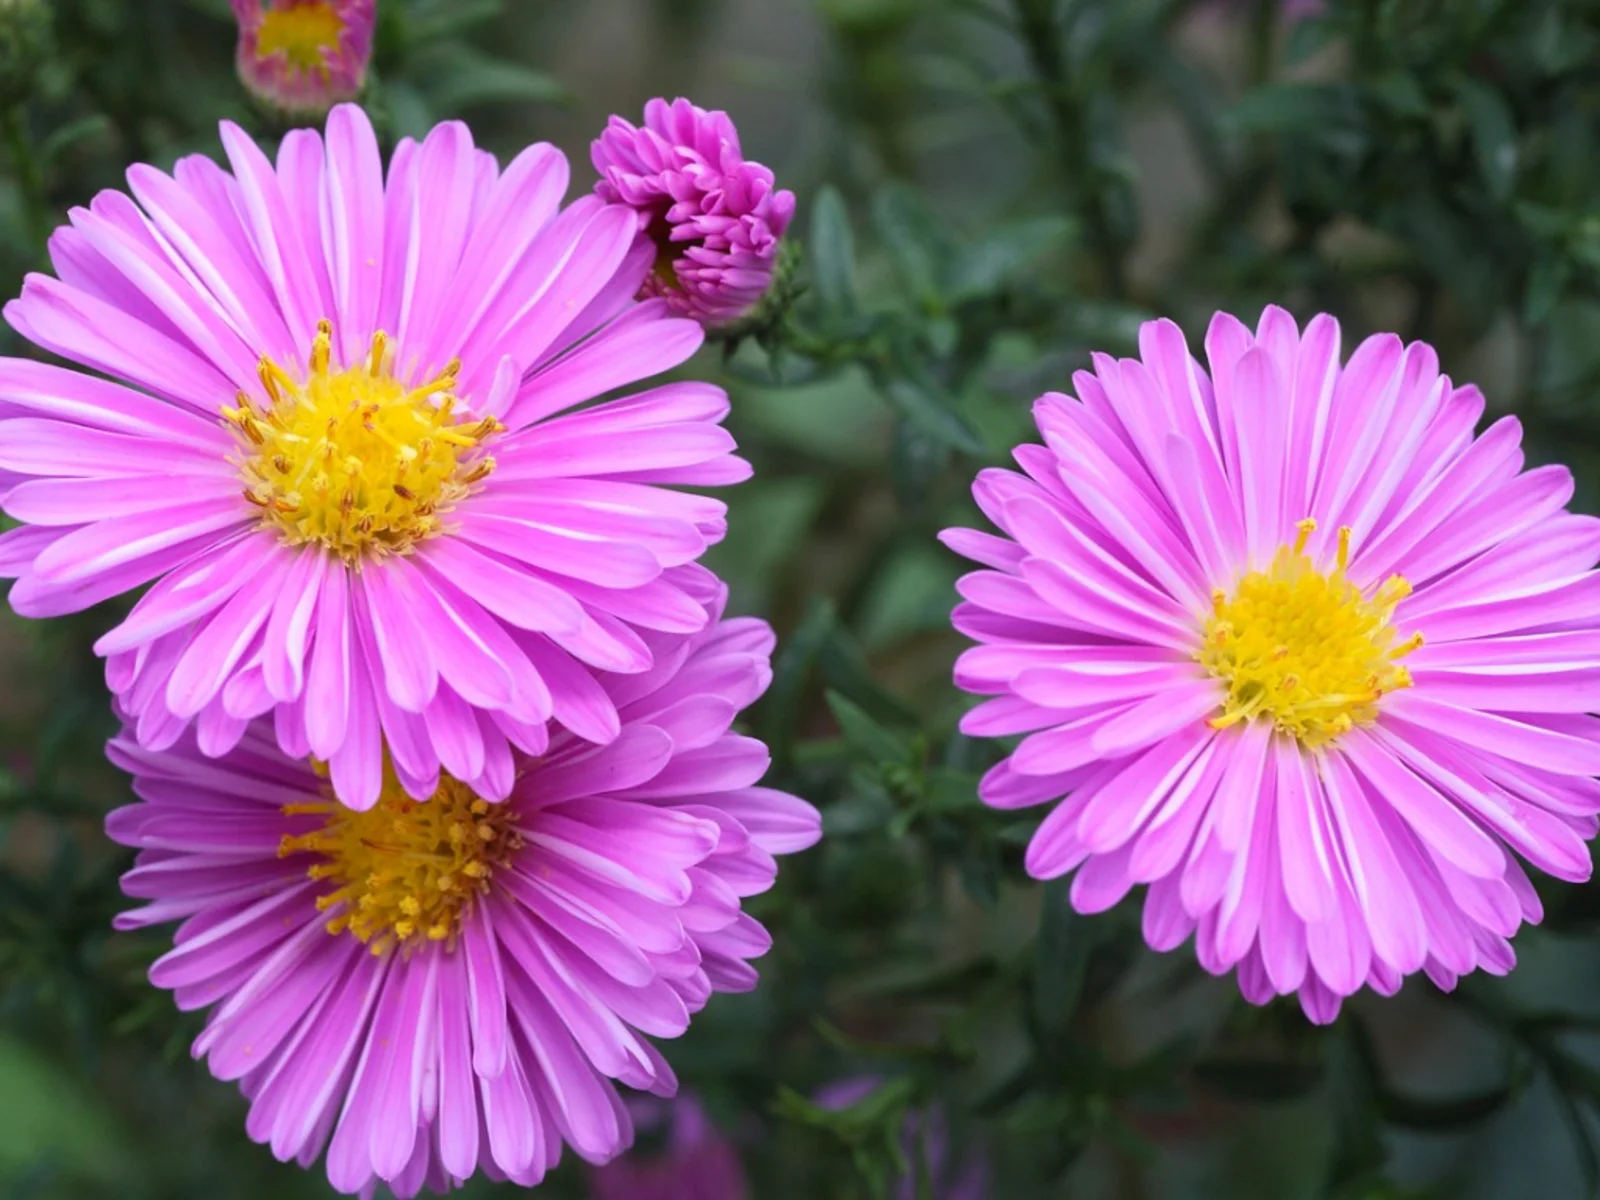 The History of the Aster Flower